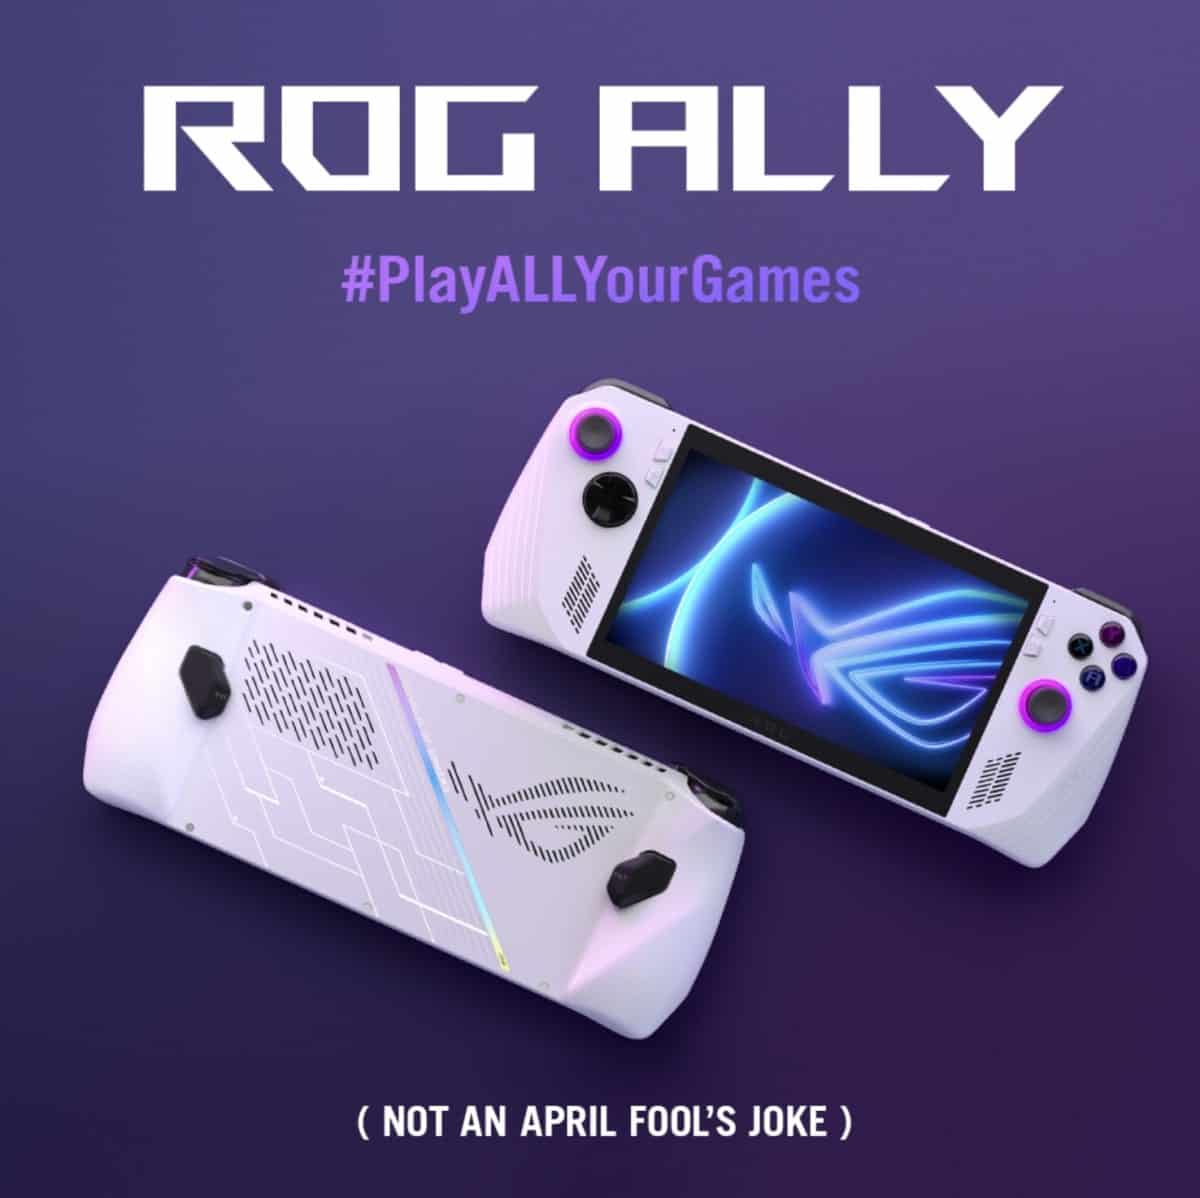 is the rog ally real